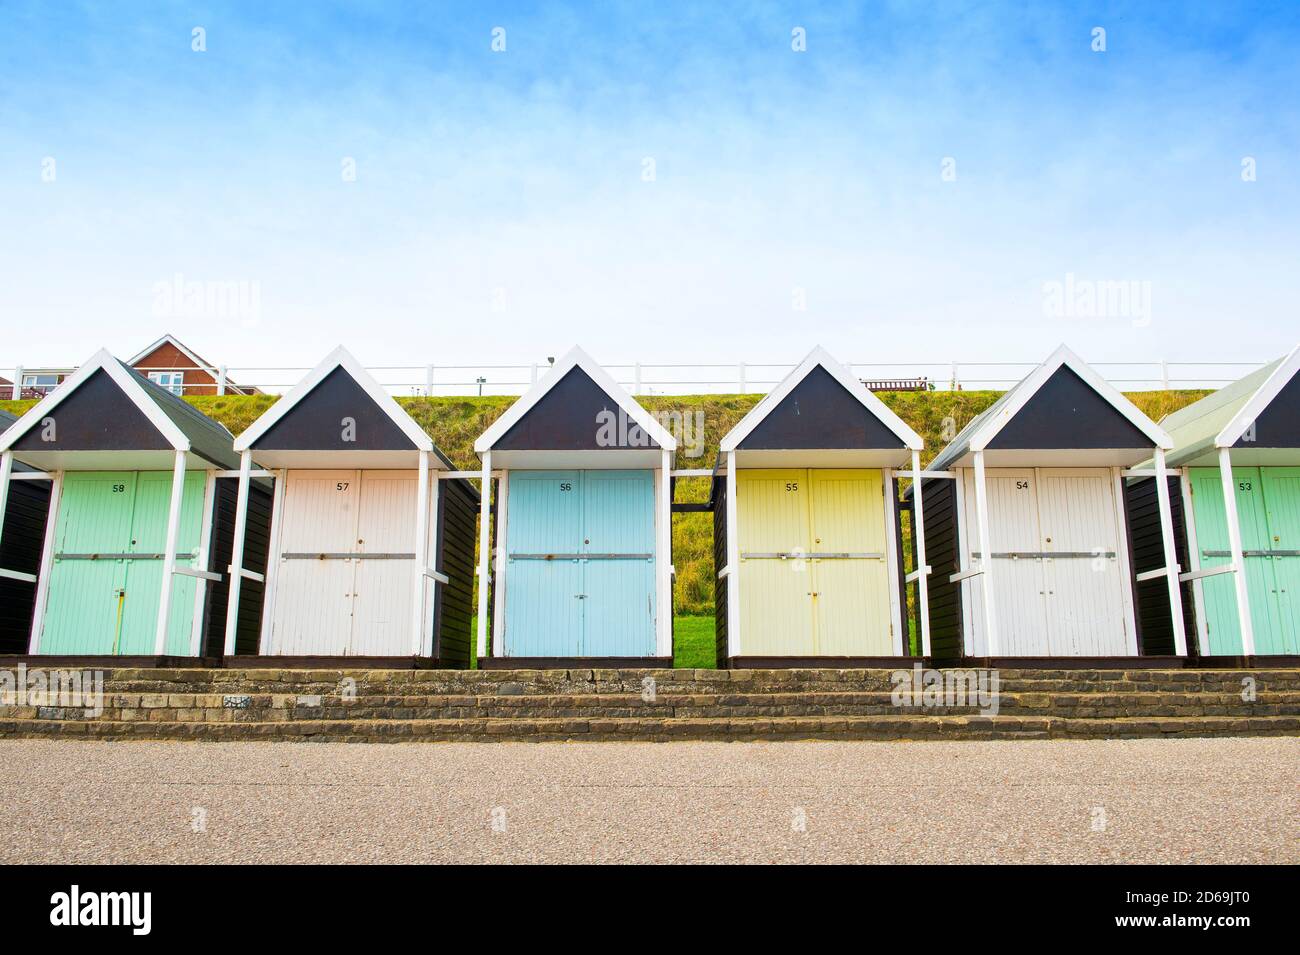 9 October 2020: Bridlington, East Yorkshire.Beach huts. Picture: Sean Spencer/Hull News & Pictures Ltd 01482 210267/07976 433960 www.hullnews.co.uk Stock Photo